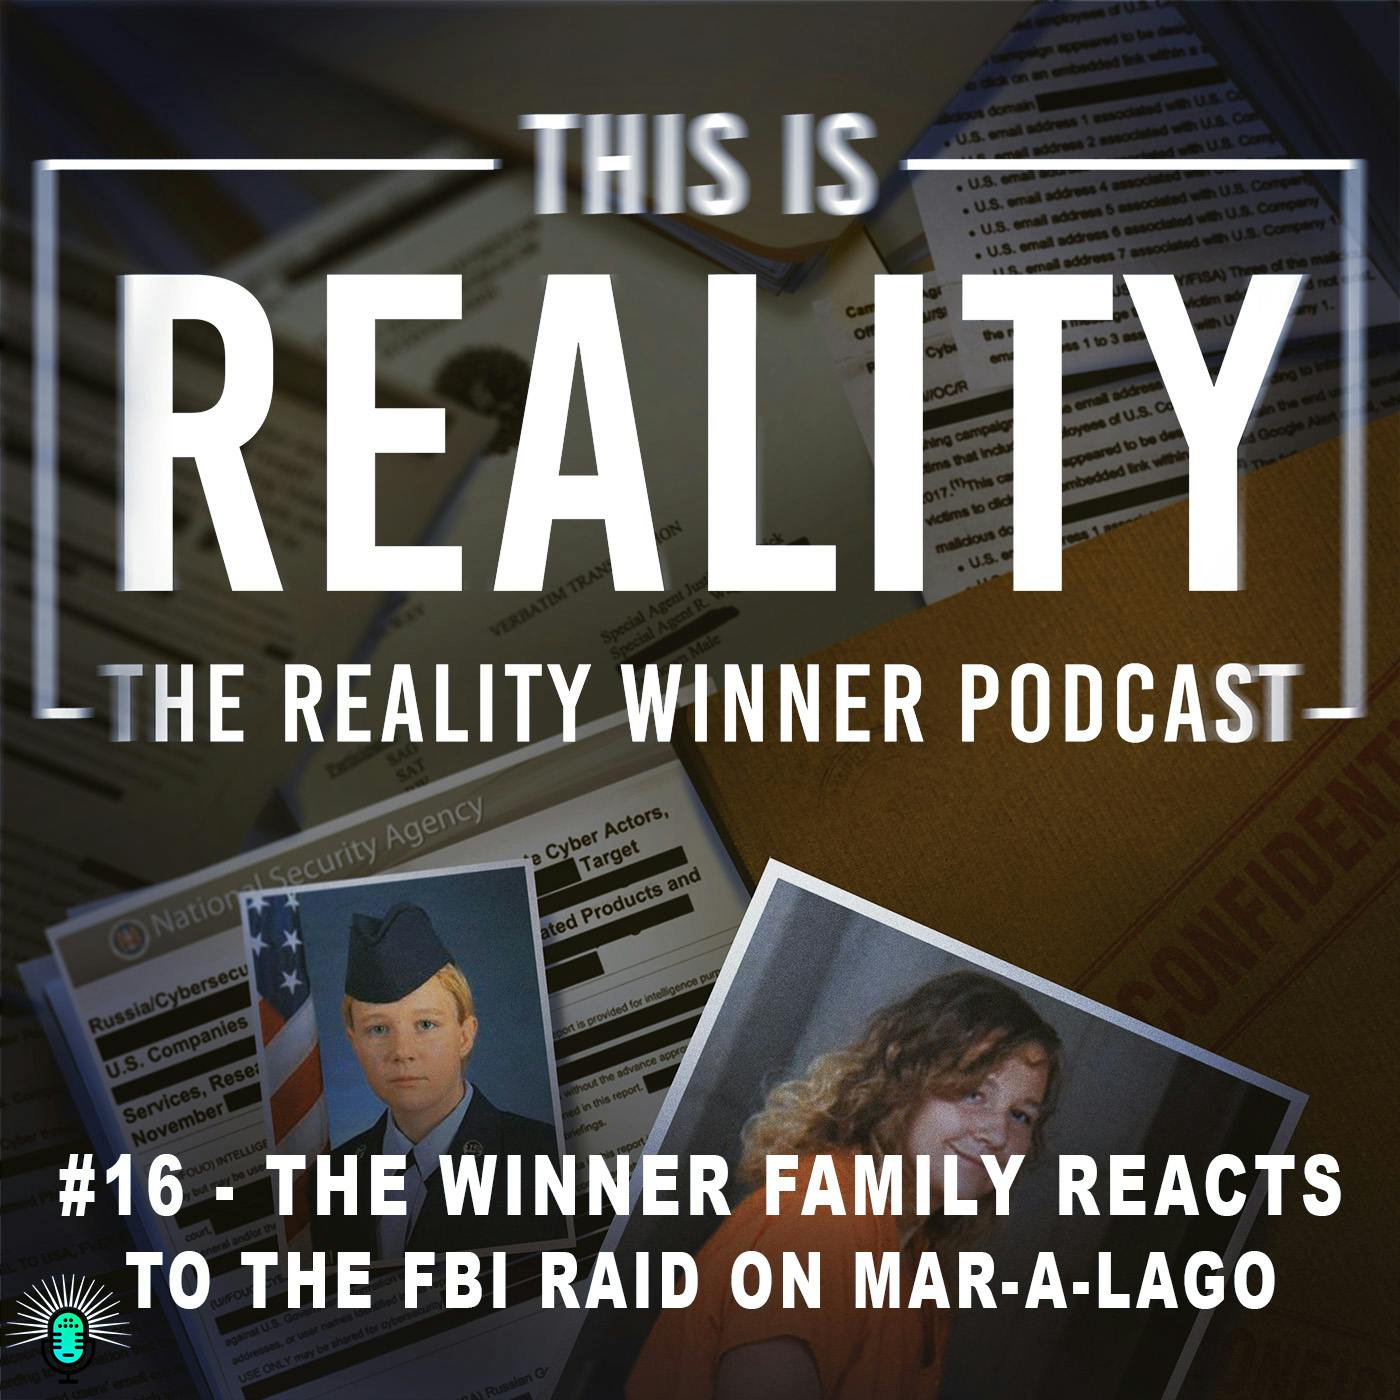 #16 - The Winner Family Reacts to the FBI Raid on Mar-a-Lago